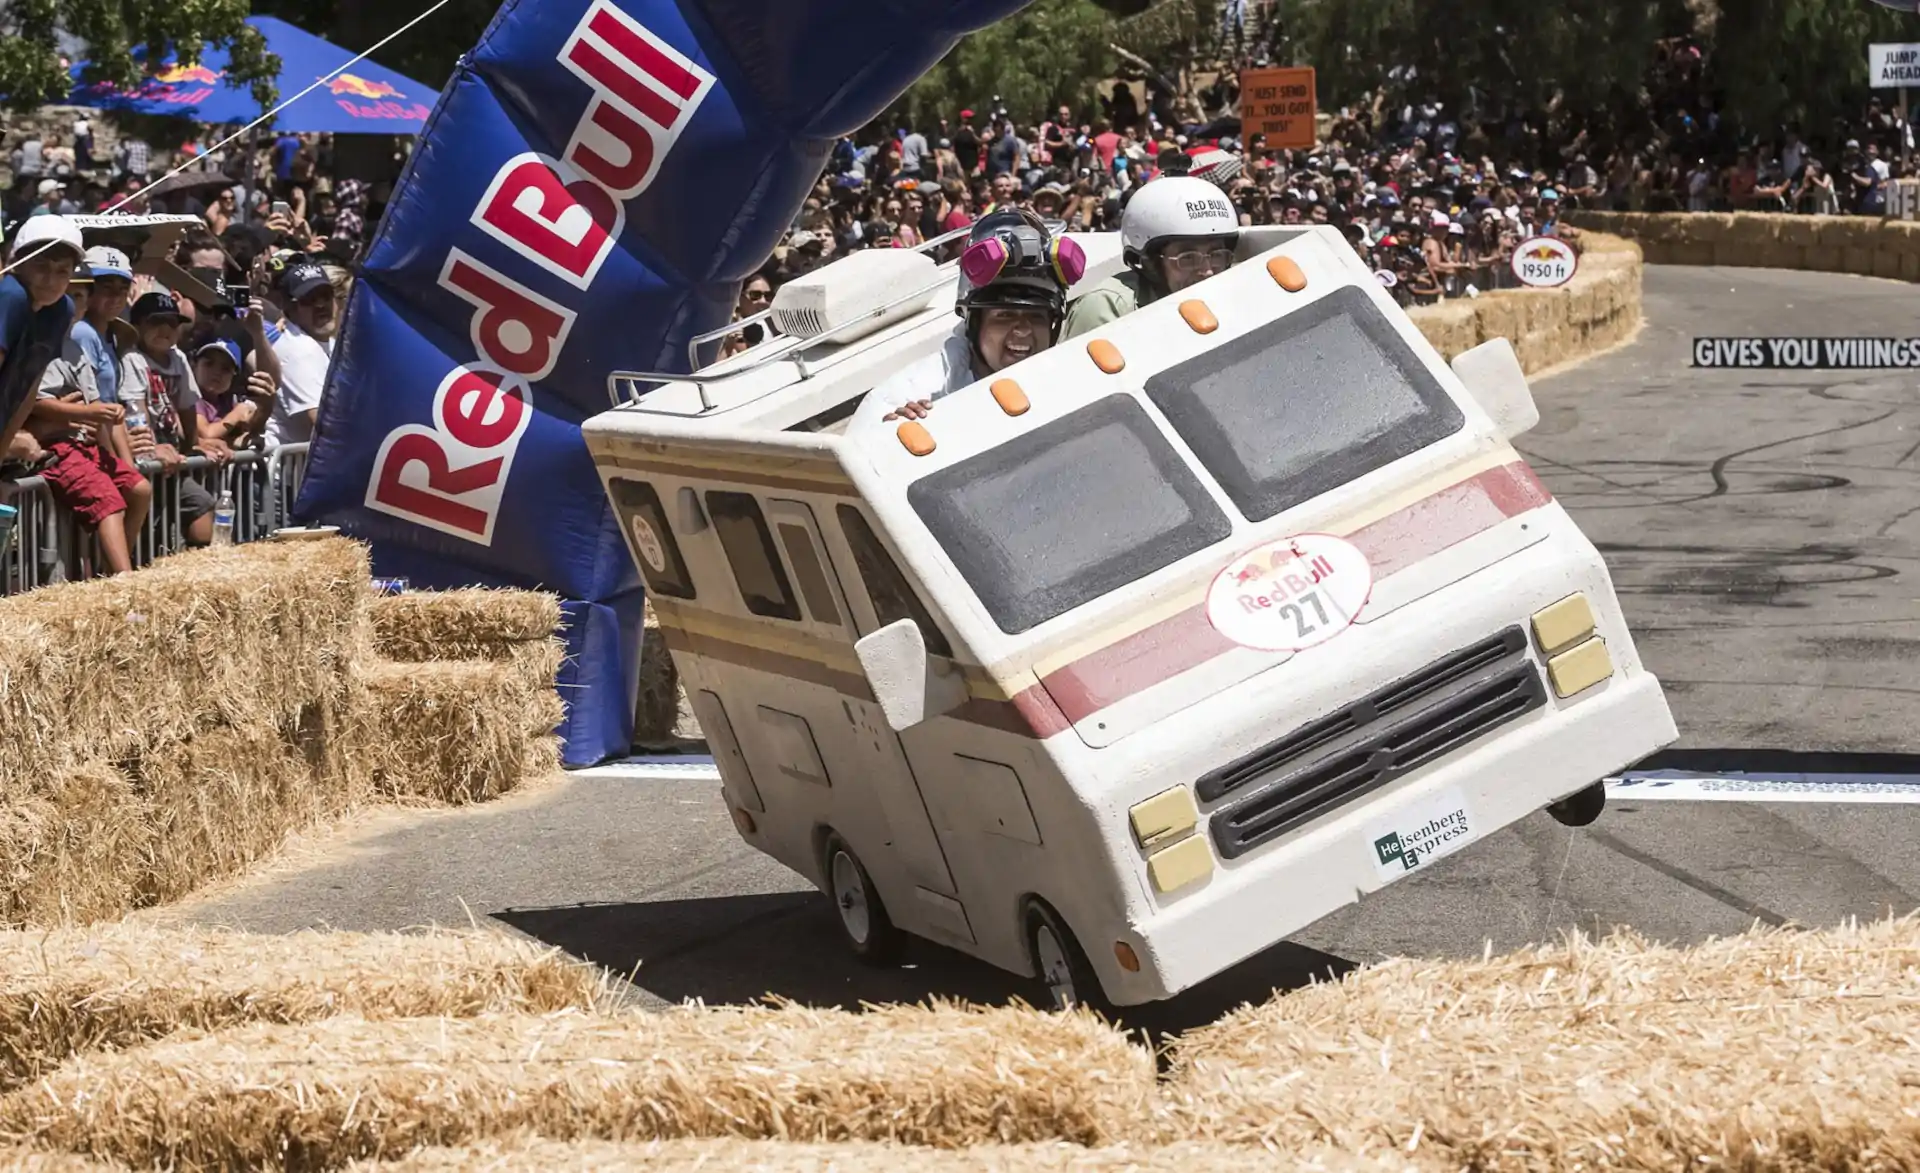 Red Bull Soap Box Racers